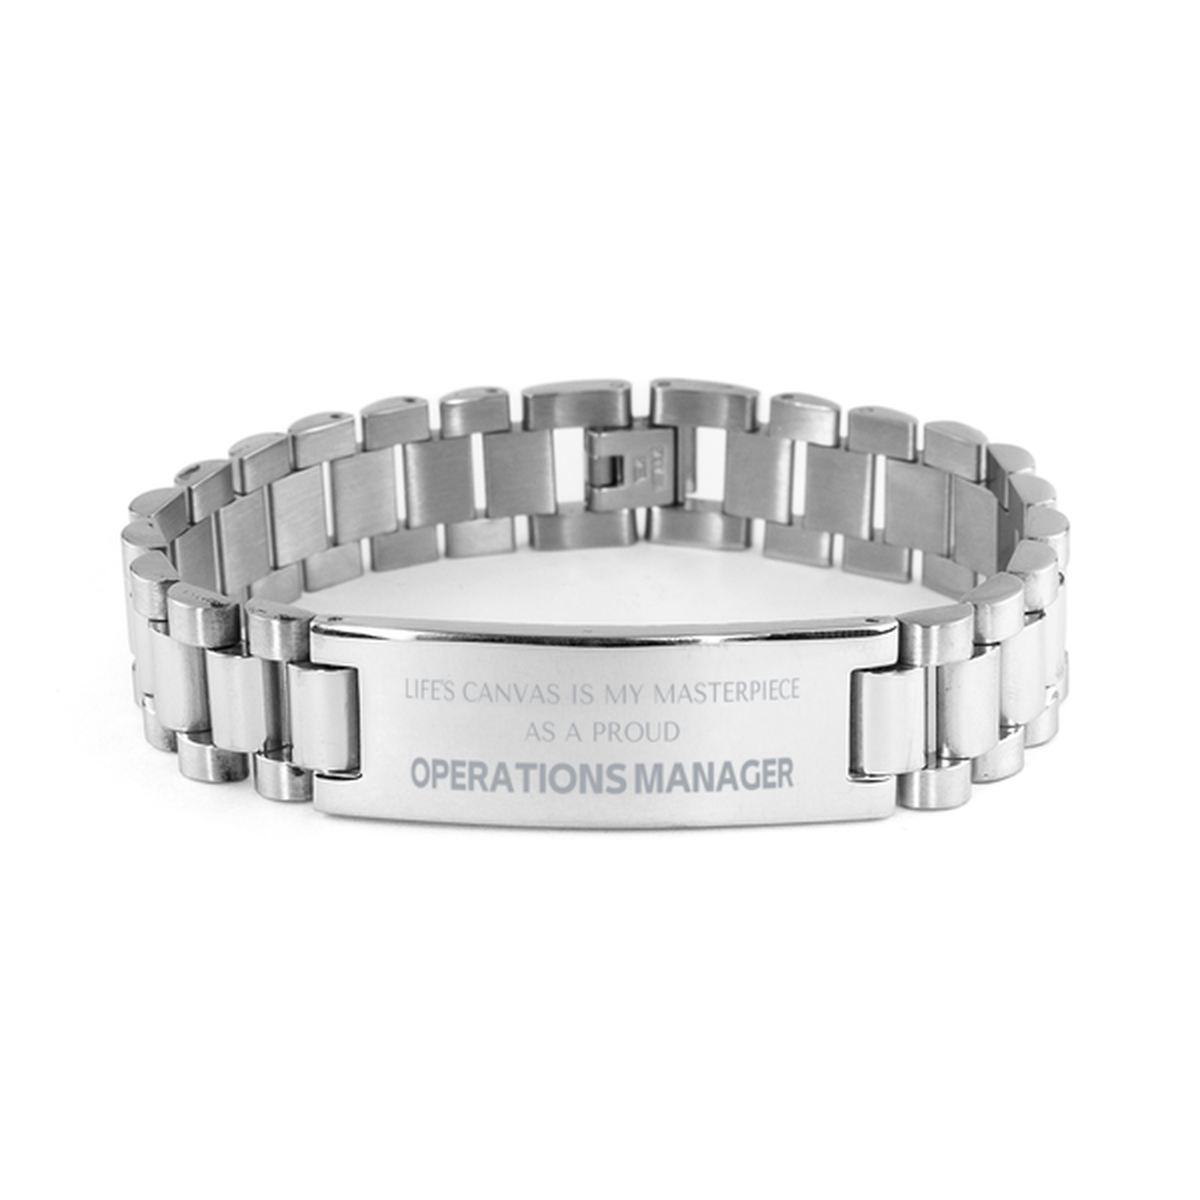 Proud Operations Manager Gifts, Life's canvas is my masterpiece, Epic Birthday Christmas Unique Ladder Stainless Steel Bracelet For Operations Manager, Coworkers, Men, Women, Friends